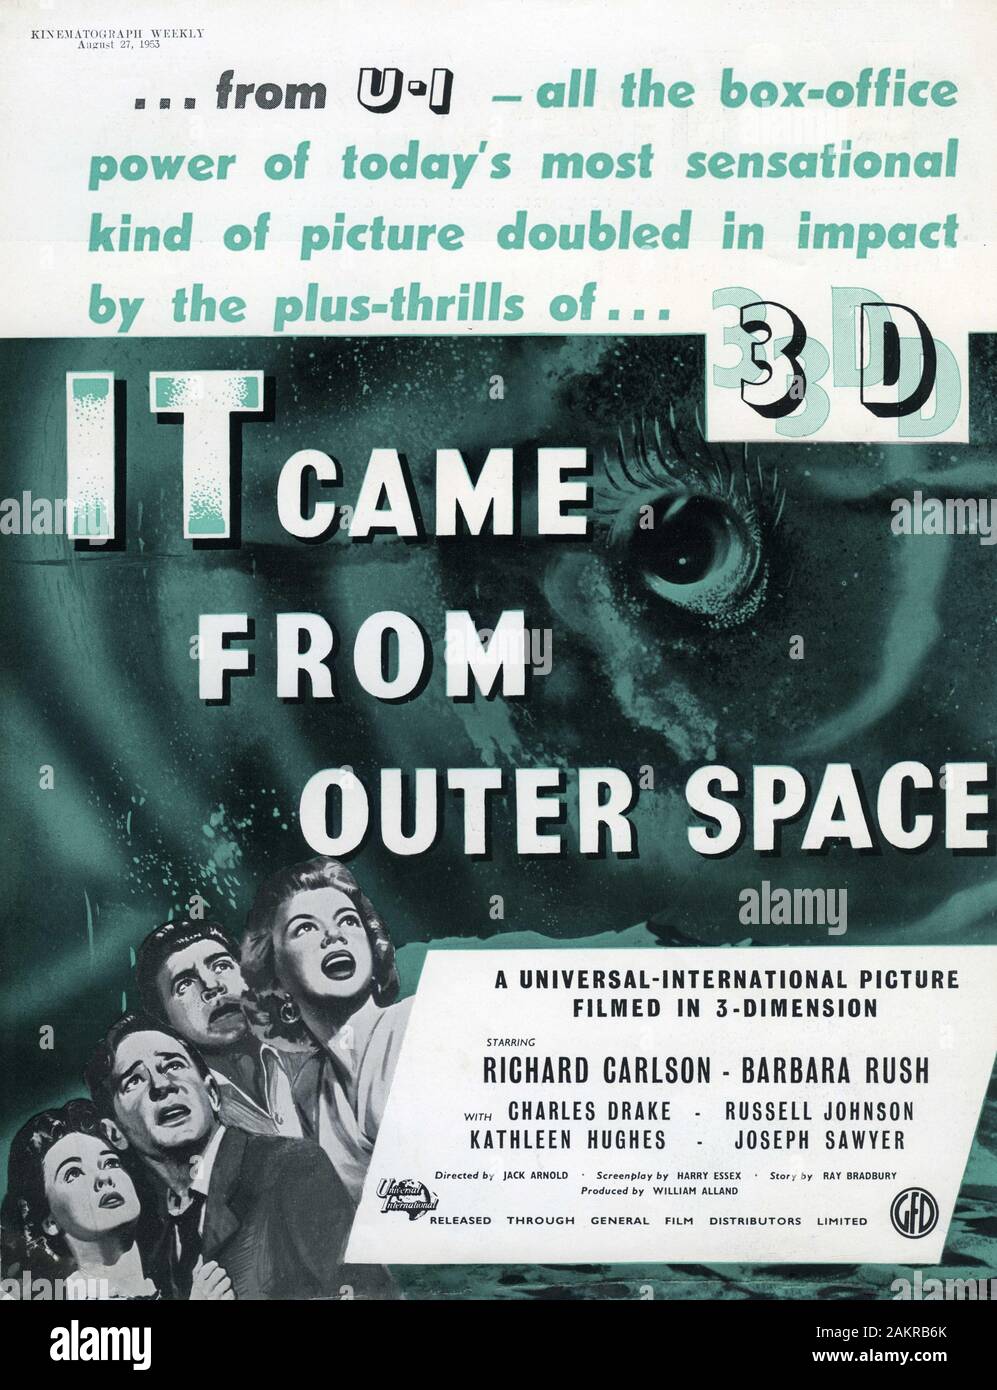 RICHARD CARLSON BARBARA RUSH CHARLES DRAKE AND KATHLEEN HUGHES in IT CAME FROM OUTER SPACE 1953 director JACK ARNOLD story RAY BRADBURY filmed in 3D producer William Alland Universal International Pictures (UI) / General Film Distributors (GFD) Stock Photo